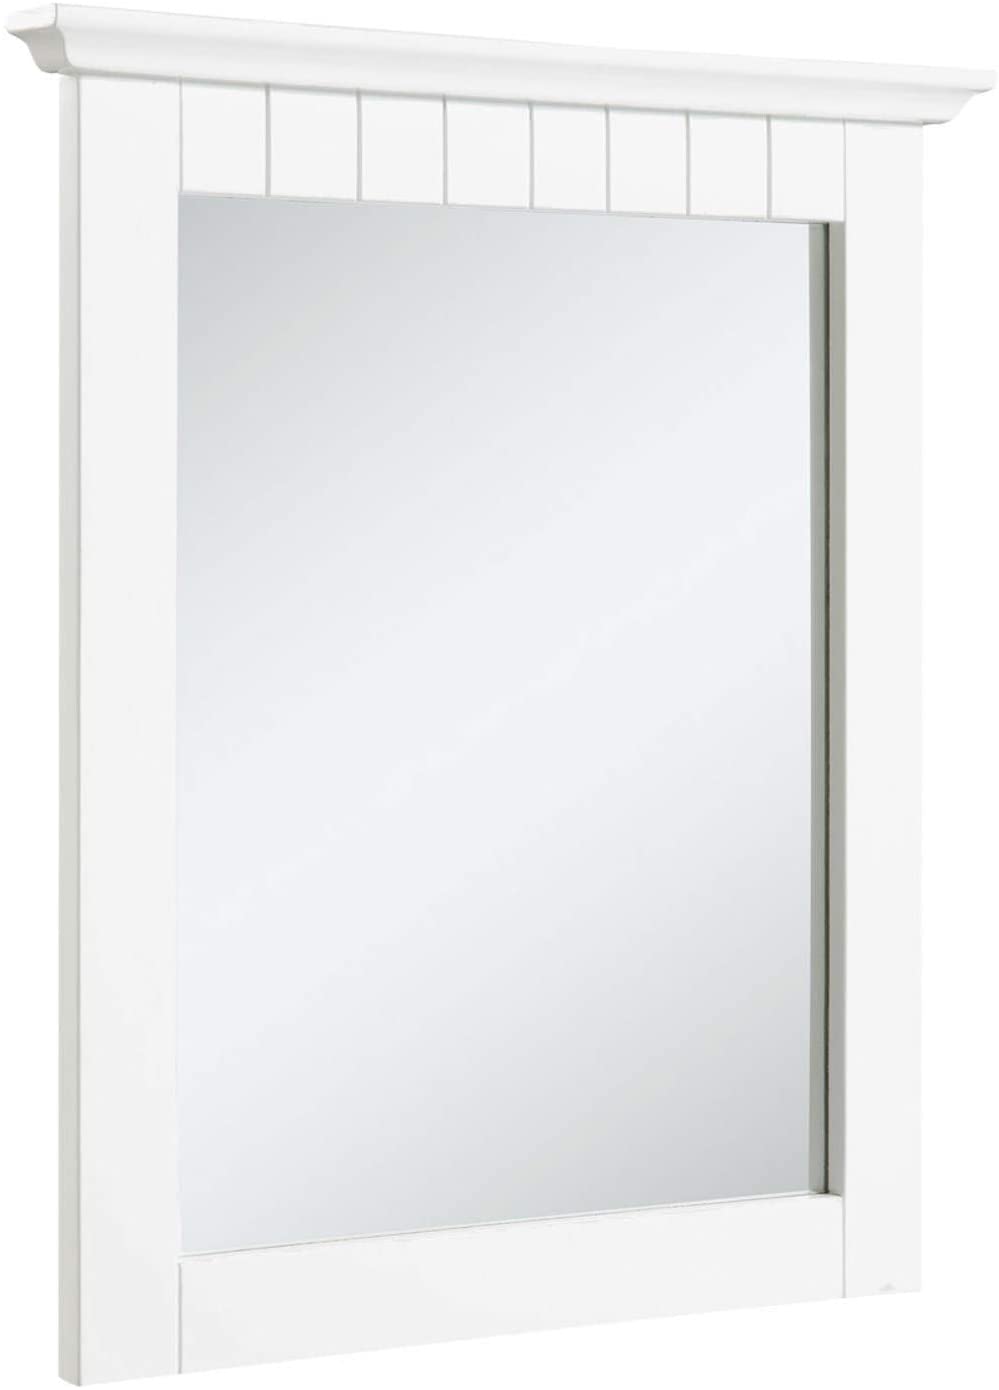 Design House 541581 Cottage Ready-To-Assemble 21x24-Inch Mirror, White